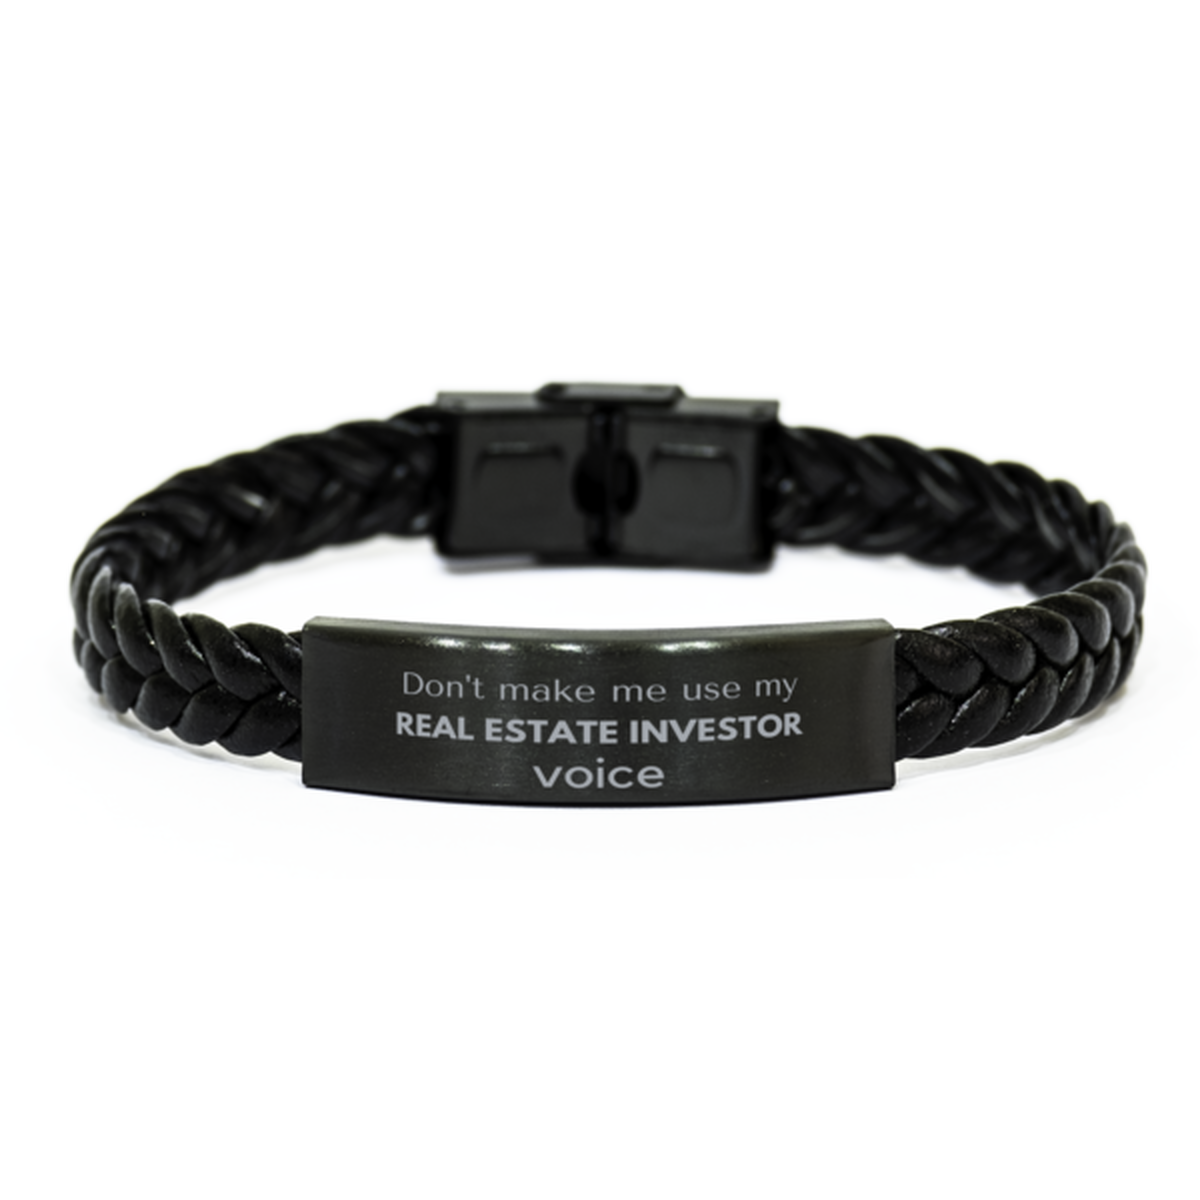 Don't make me use my Real Estate Investor voice, Sarcasm Real Estate Investor Gifts, Christmas Real Estate Investor Braided Leather Bracelet Birthday Unique Gifts For Real Estate Investor Coworkers, Men, Women, Colleague, Friends